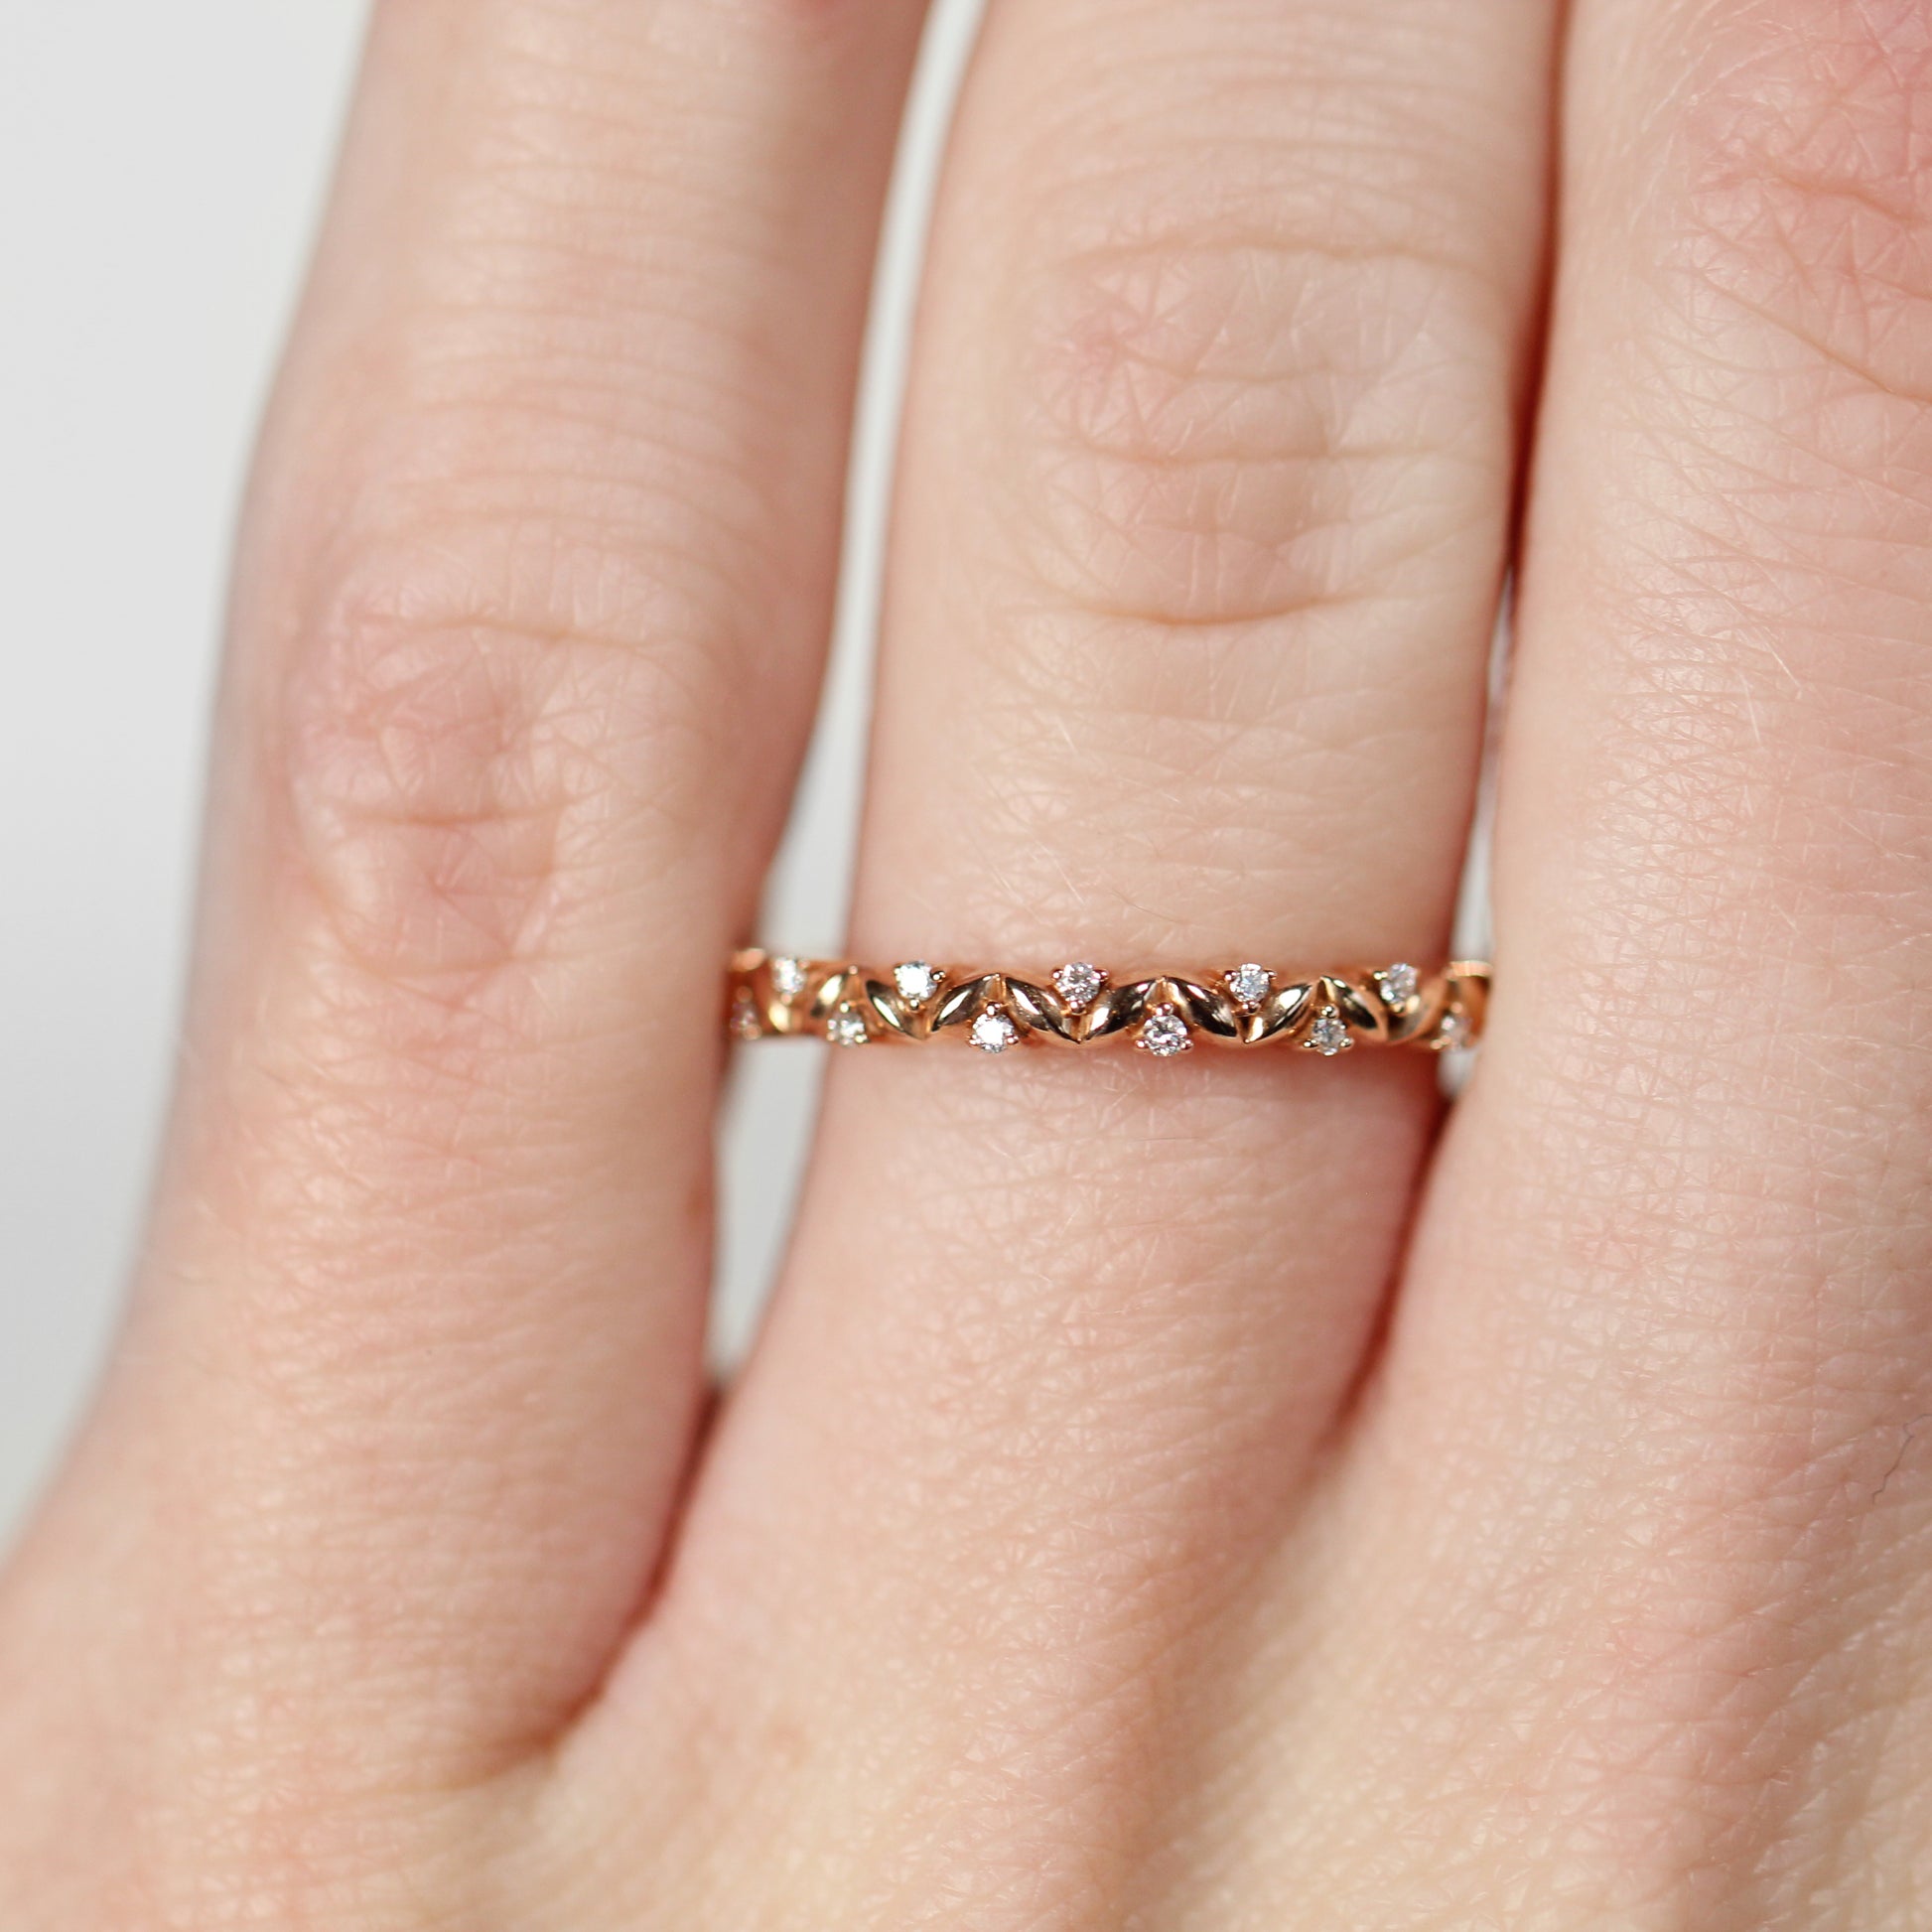 Brynn - Nature Inspired Diamond Wedding or Stacking Ring Band in Your Choice of 14K Gold